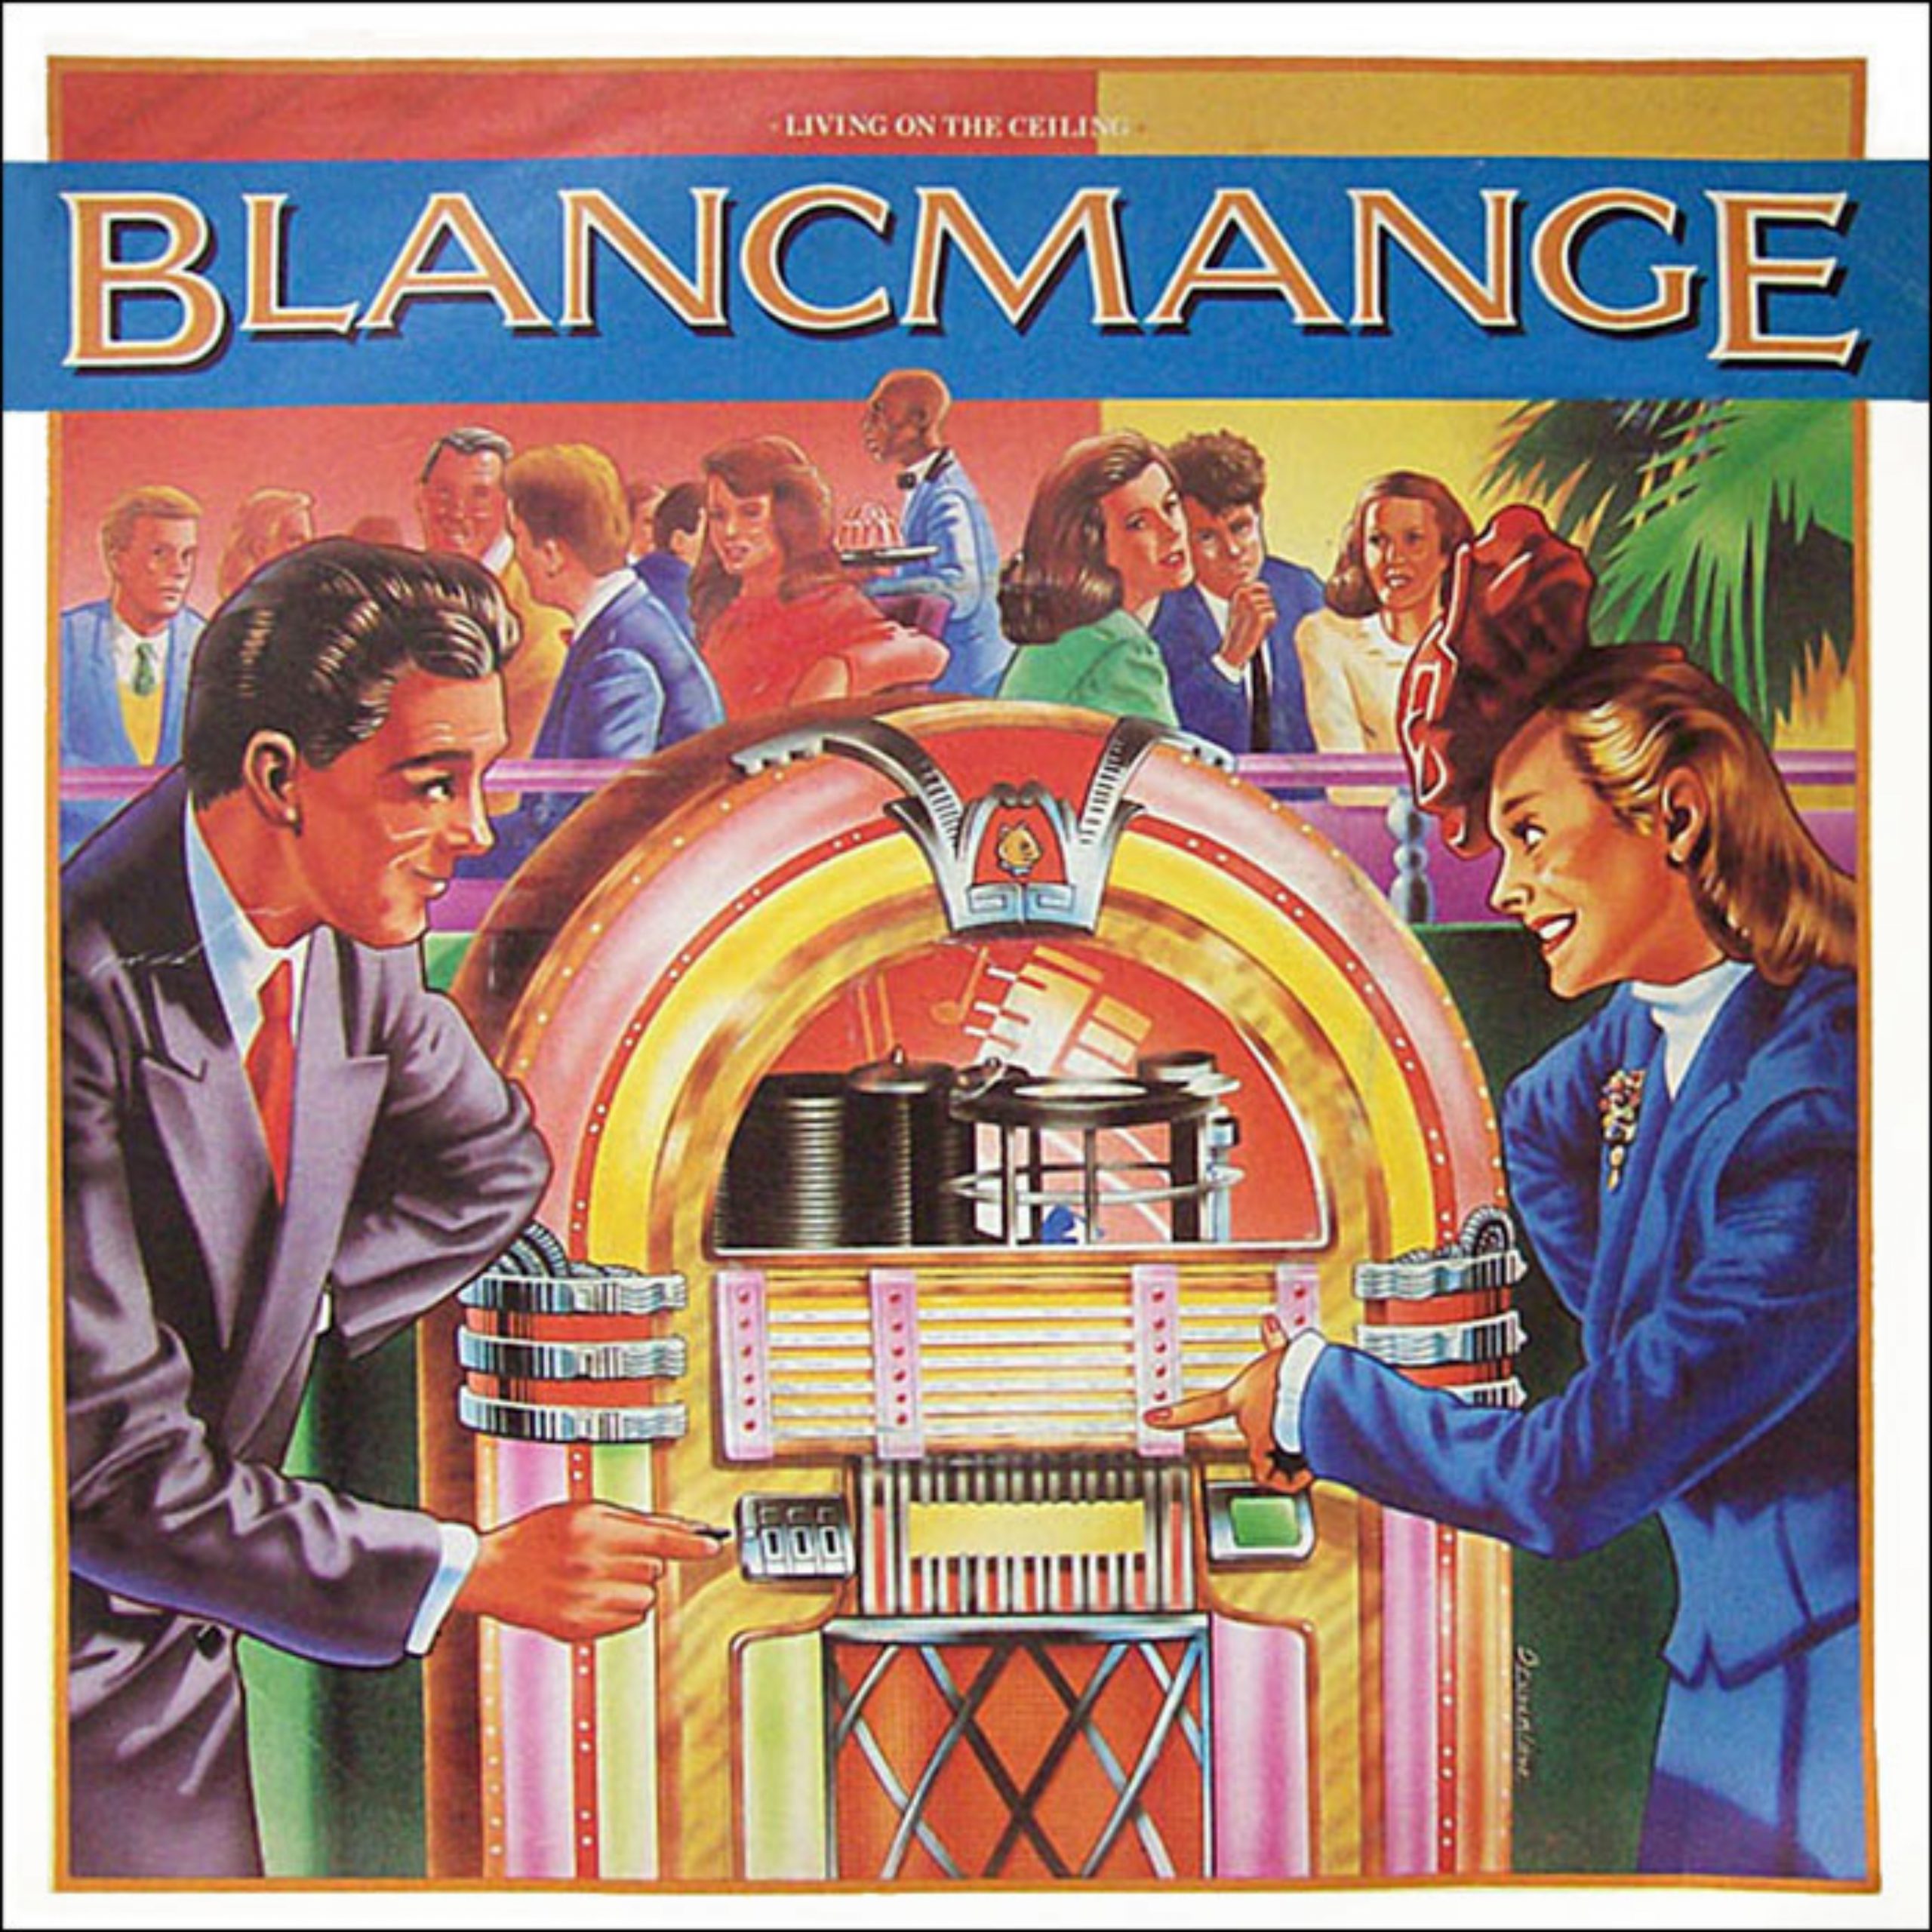 “Living On The Ceiling” by Blancmange: The Exotic Synth-Pop Sensation of the 80s